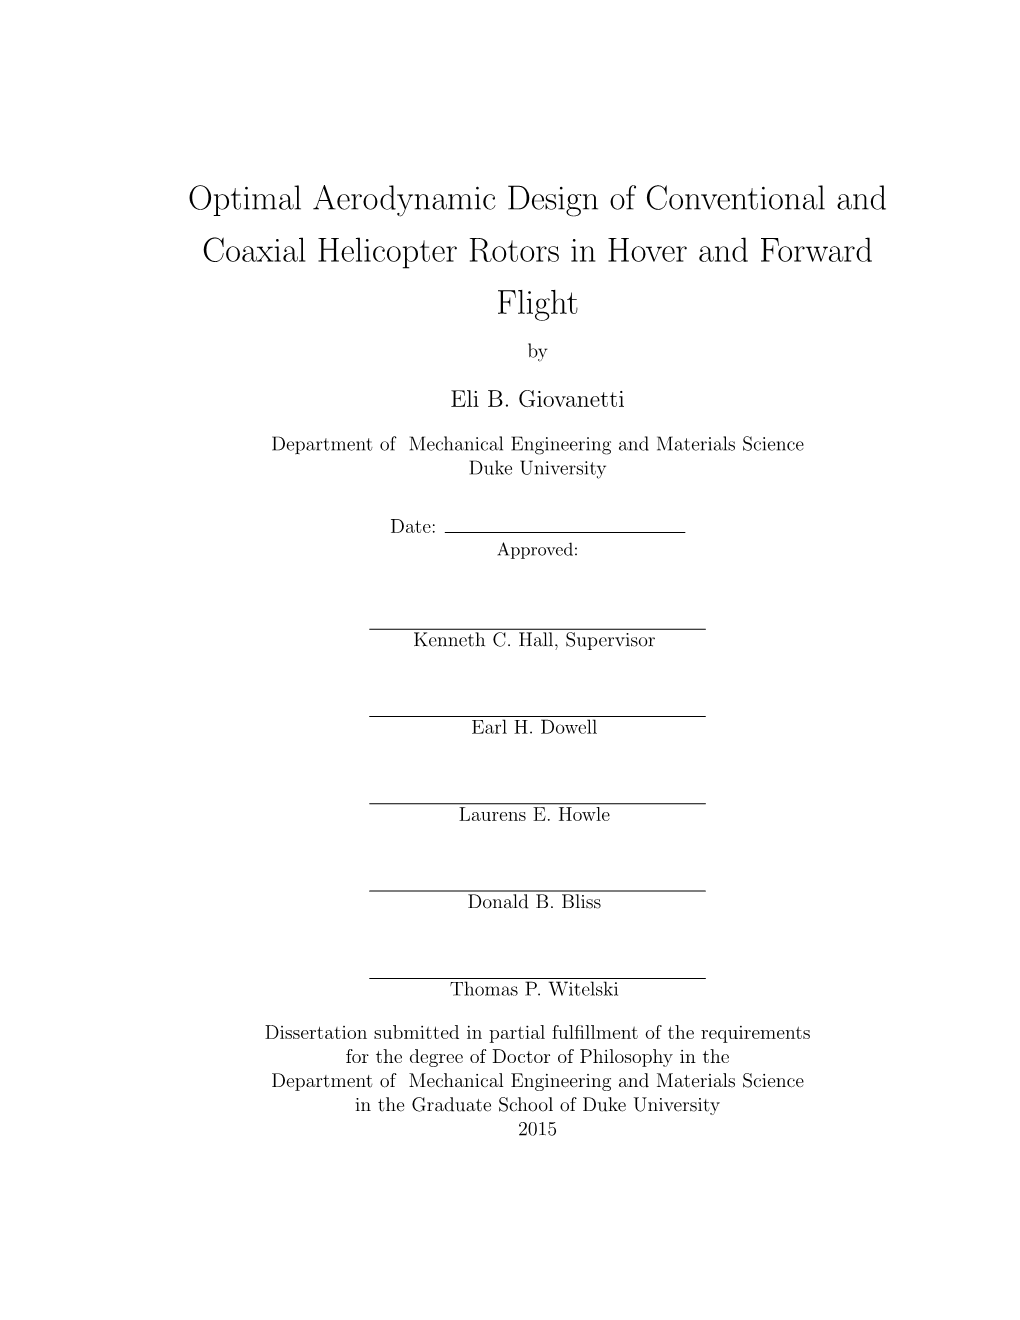 Optimal Aerodynamic Design of Conventional and Coaxial Helicopter Rotors in Hover and Forward Flight